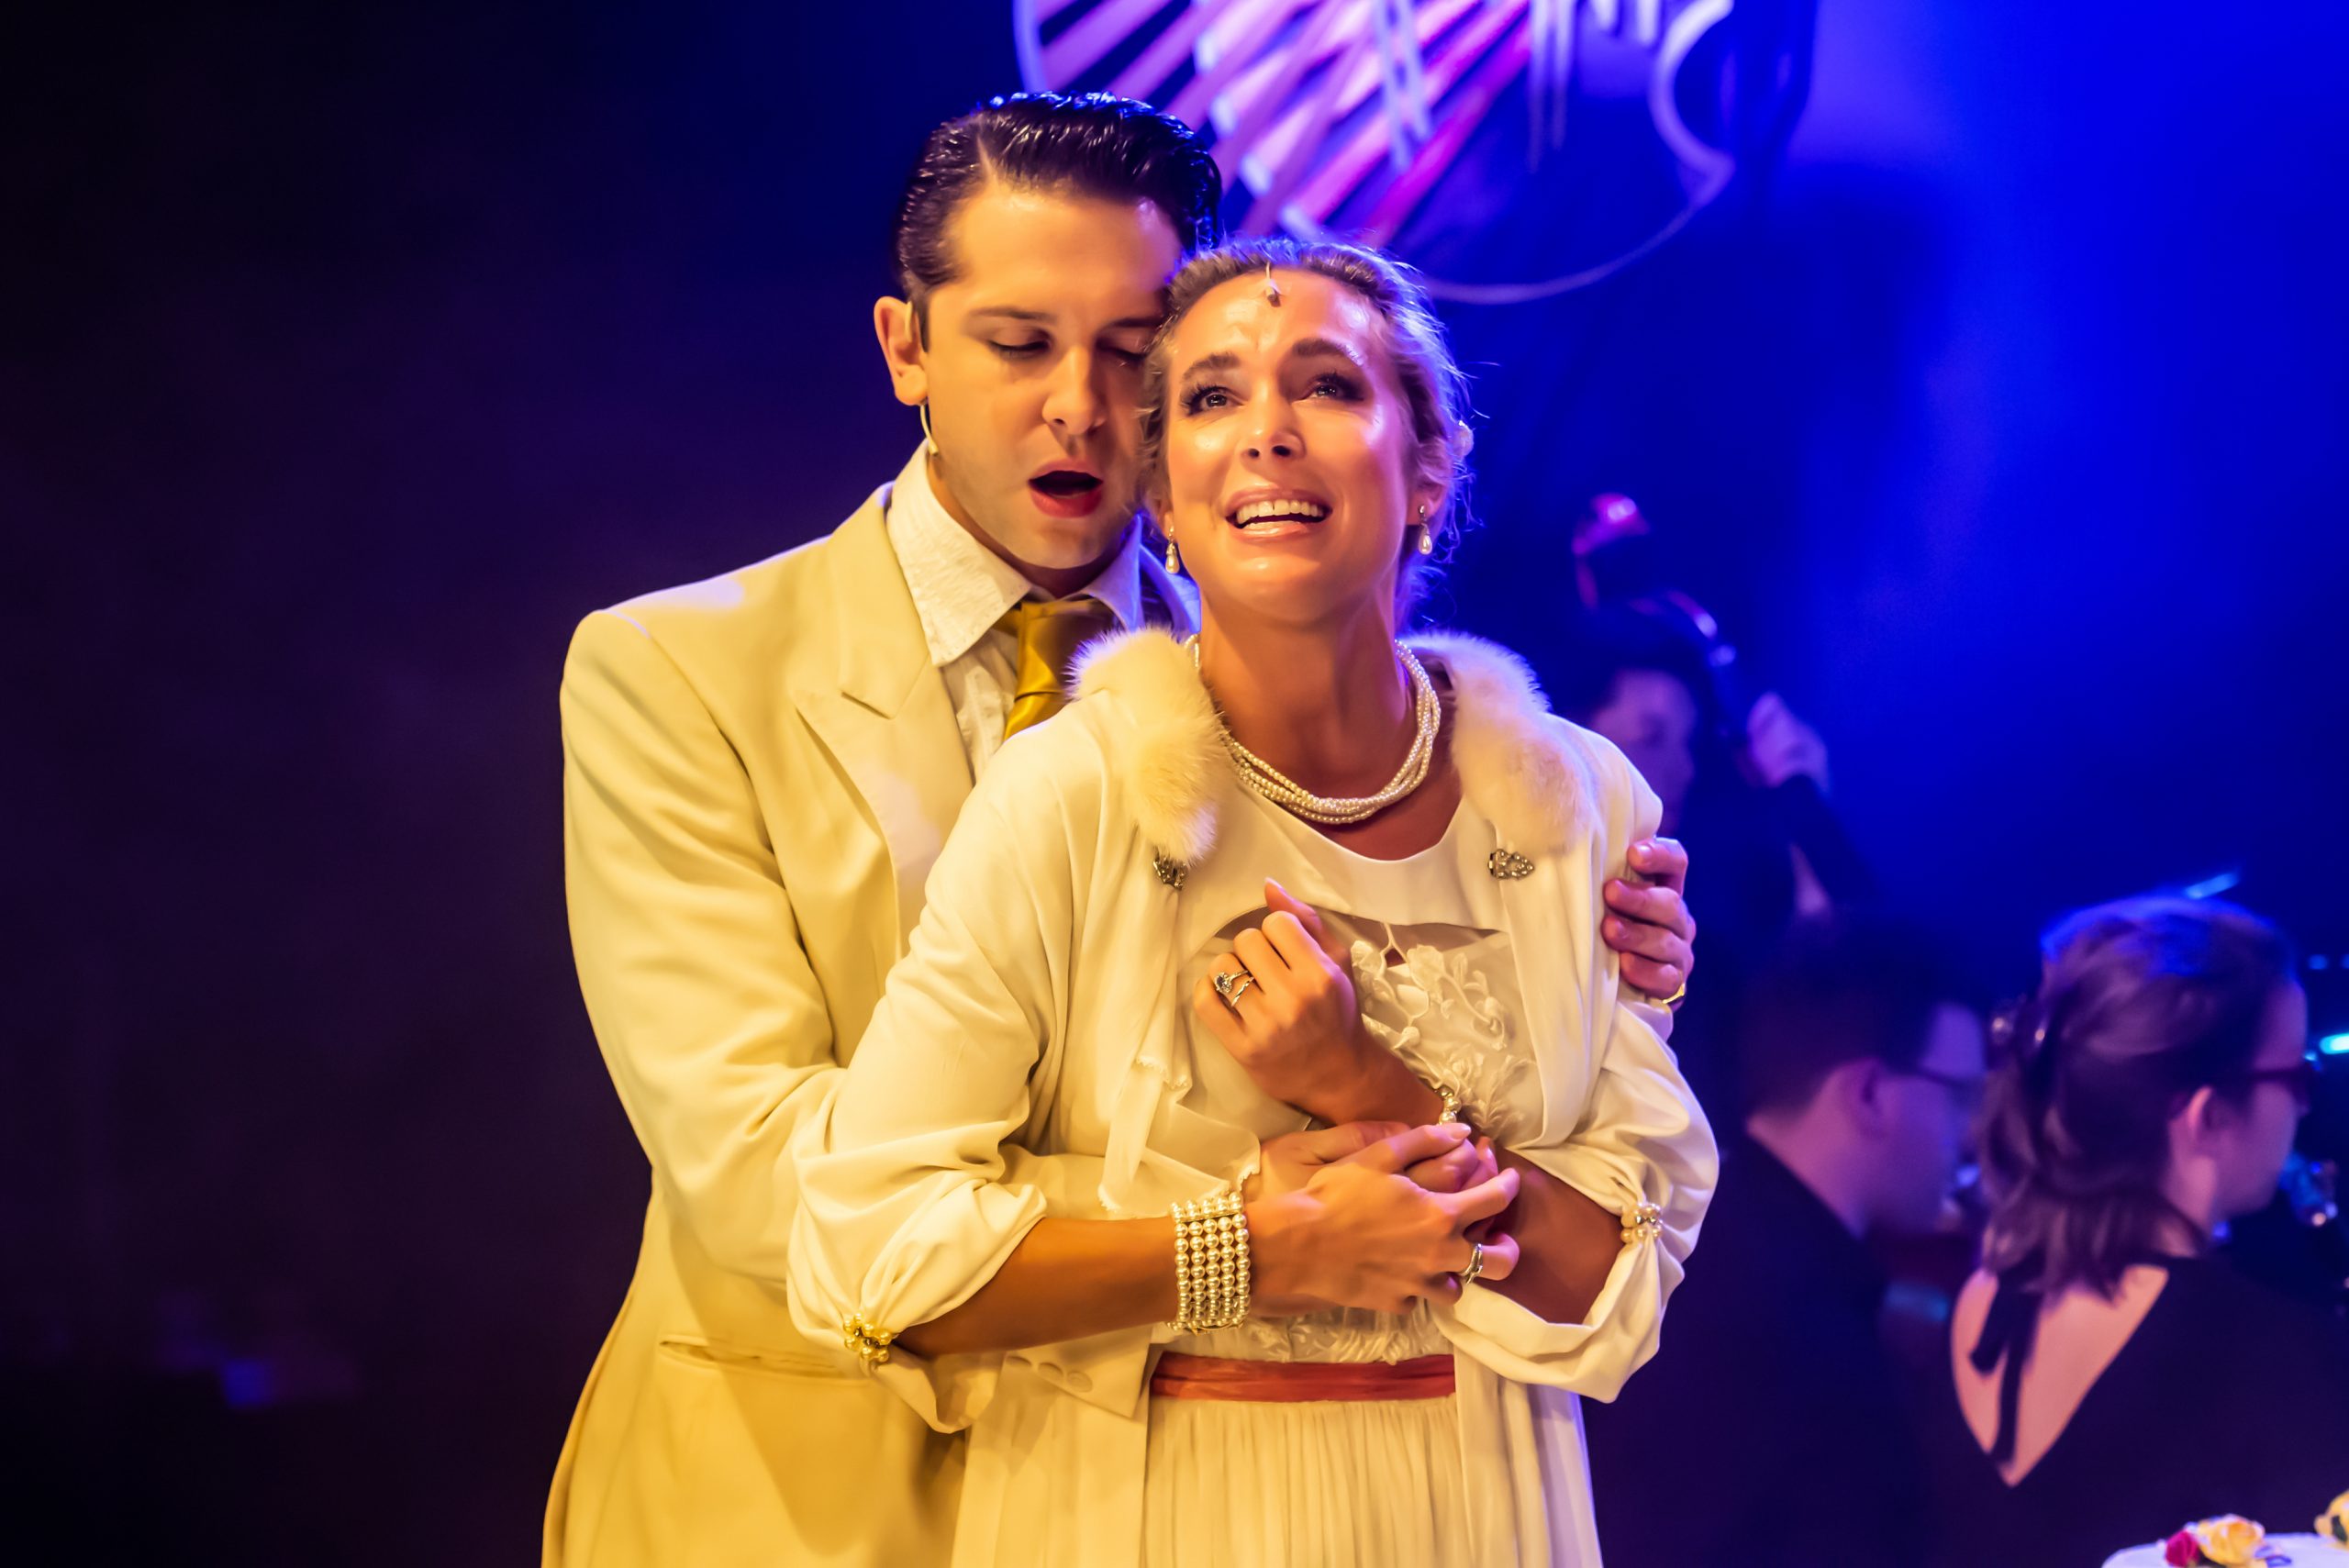 Gatsby at the Southwark Theatre Review